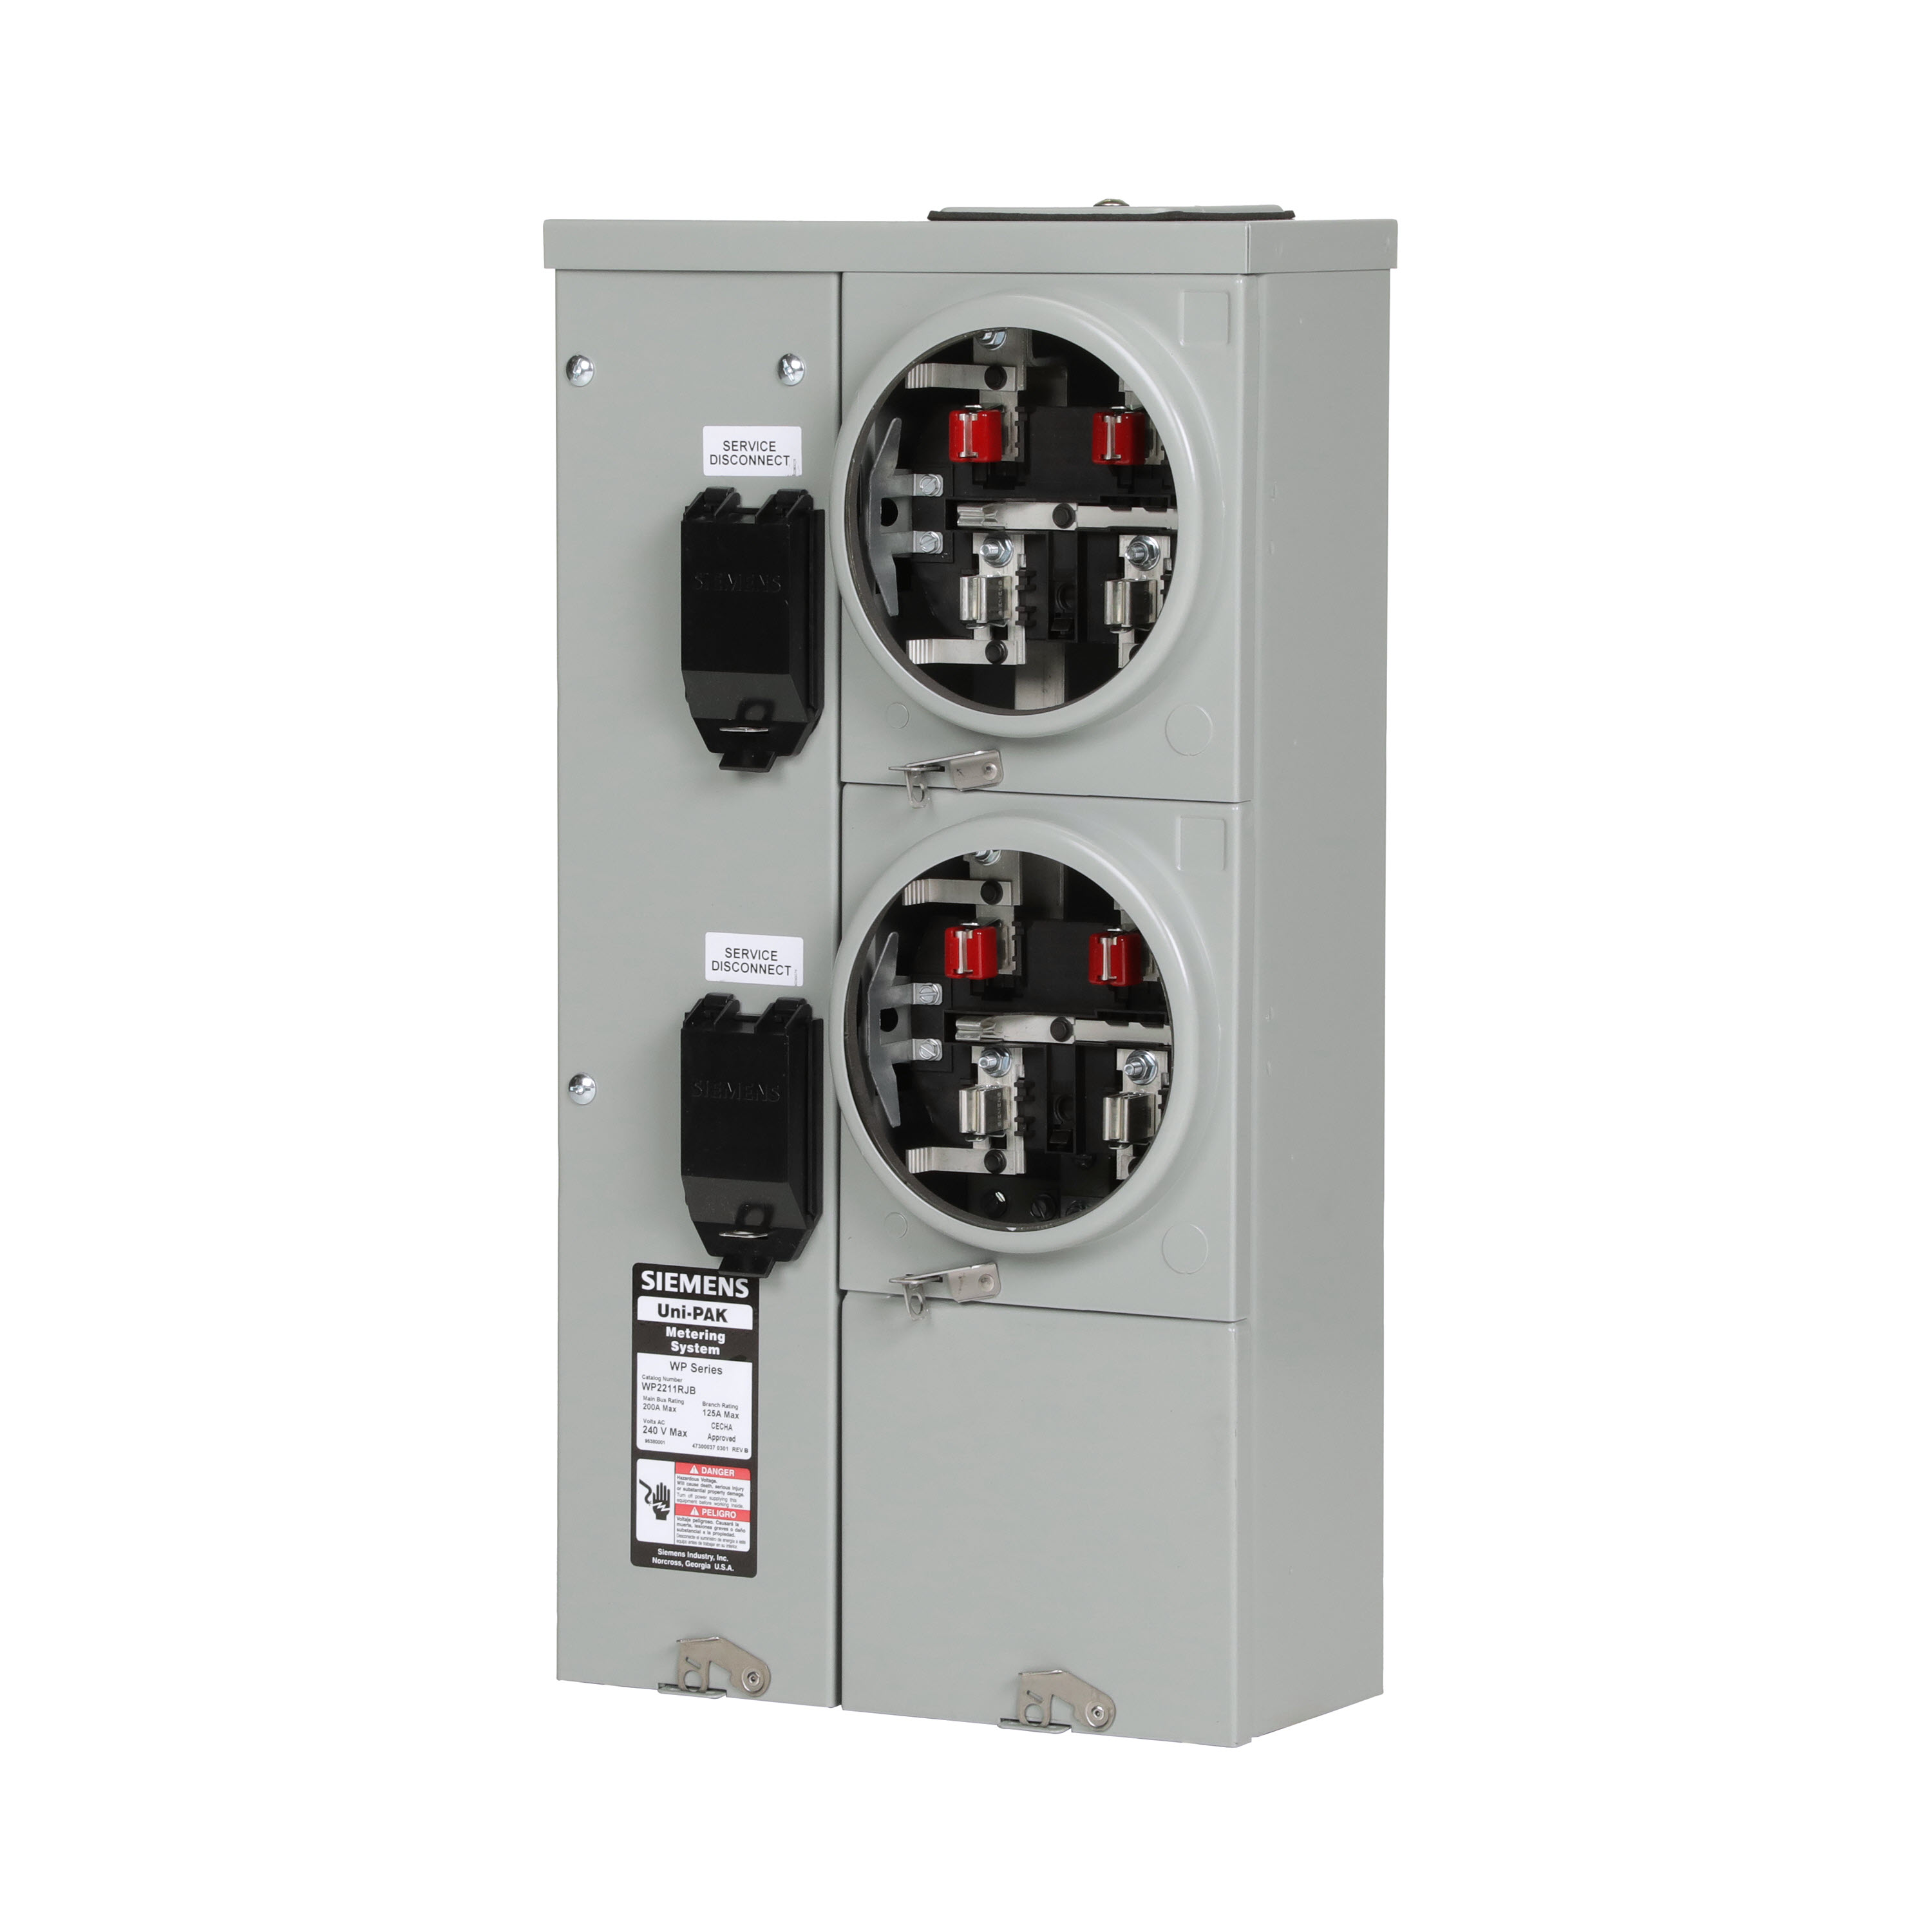 Siemens Low Voltage s Multi-Family Metering Line of PAK Metering Standard 125A as part of the PAK Metering Standard 125A Group. Type UNI-PAK Features HORN BYPASS Appn GARDEN - STYLE Std UL-50,67,414 V. Rating 120/240V A. Rating 200A Phase 1PH Size 7.25 x 14.05 x 27.140 No. Of Cutouts 7 Cutout Size 2X1/2 , 1 x (1-1/2,1-1/4,1 ), 2 x (,2 ,1-1/2,1-1/4,1 ), 1 x (3,2-1/2,2,1-1/2,2 ), 1X4 Cable Entry TOP/BOTTOM Terminal 3X2 STUDS. Insulated.Appn . Wall Mounted. Enclosure RINGLESS